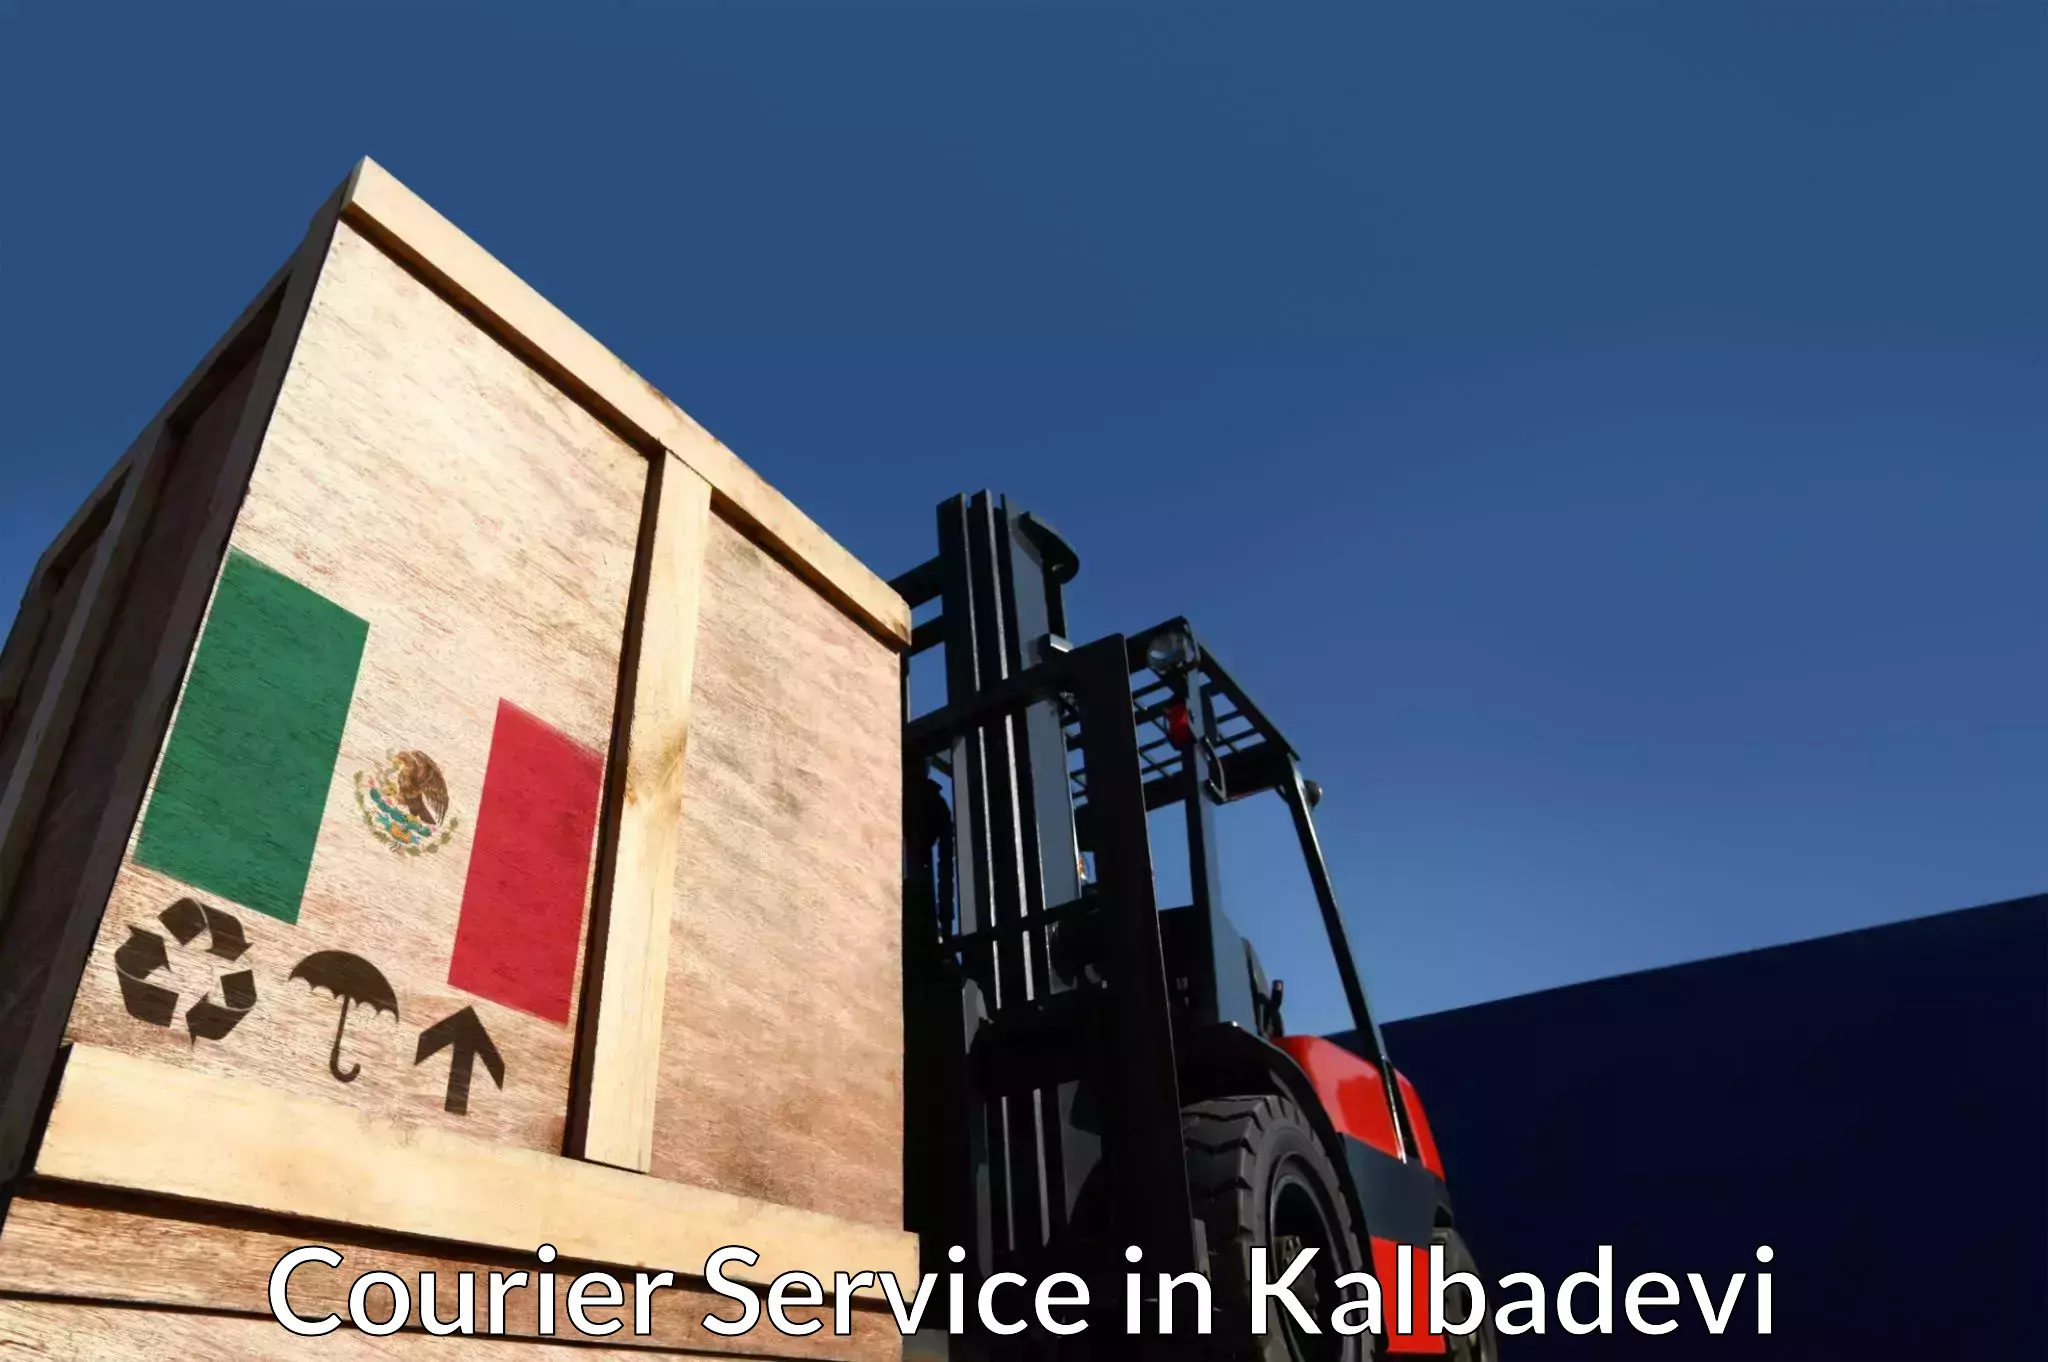 Express postal services in Kalbadevi